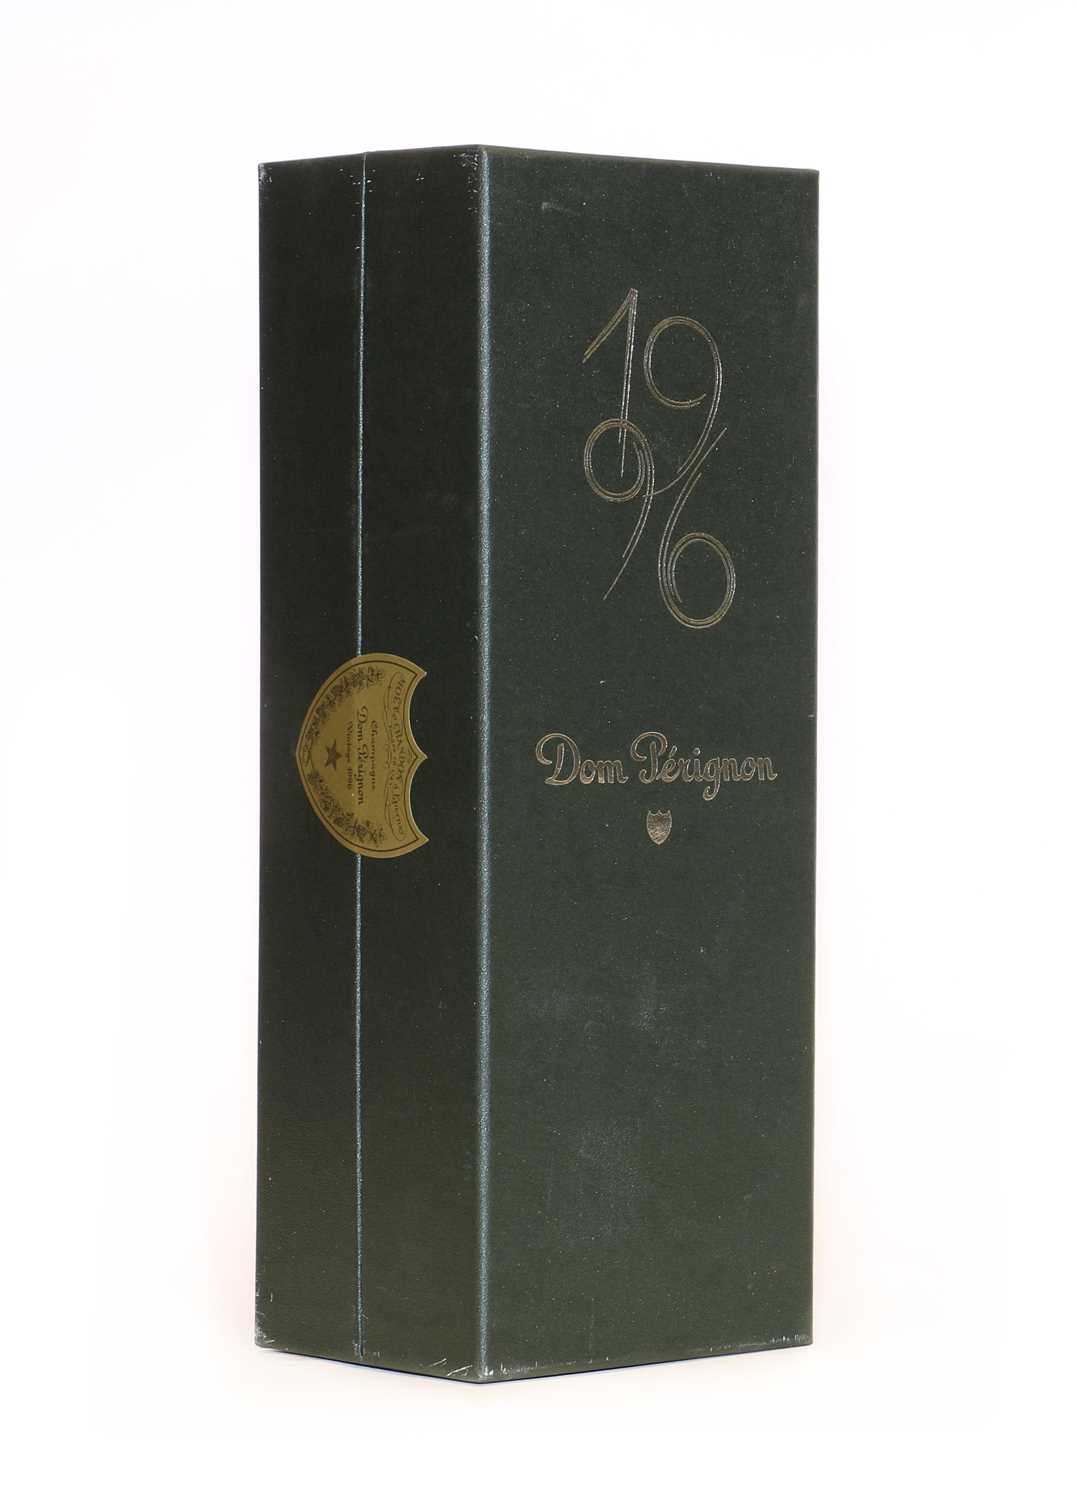 Lot 19 - Dom Perignon, Epernay, 1996, one bottle (boxed)